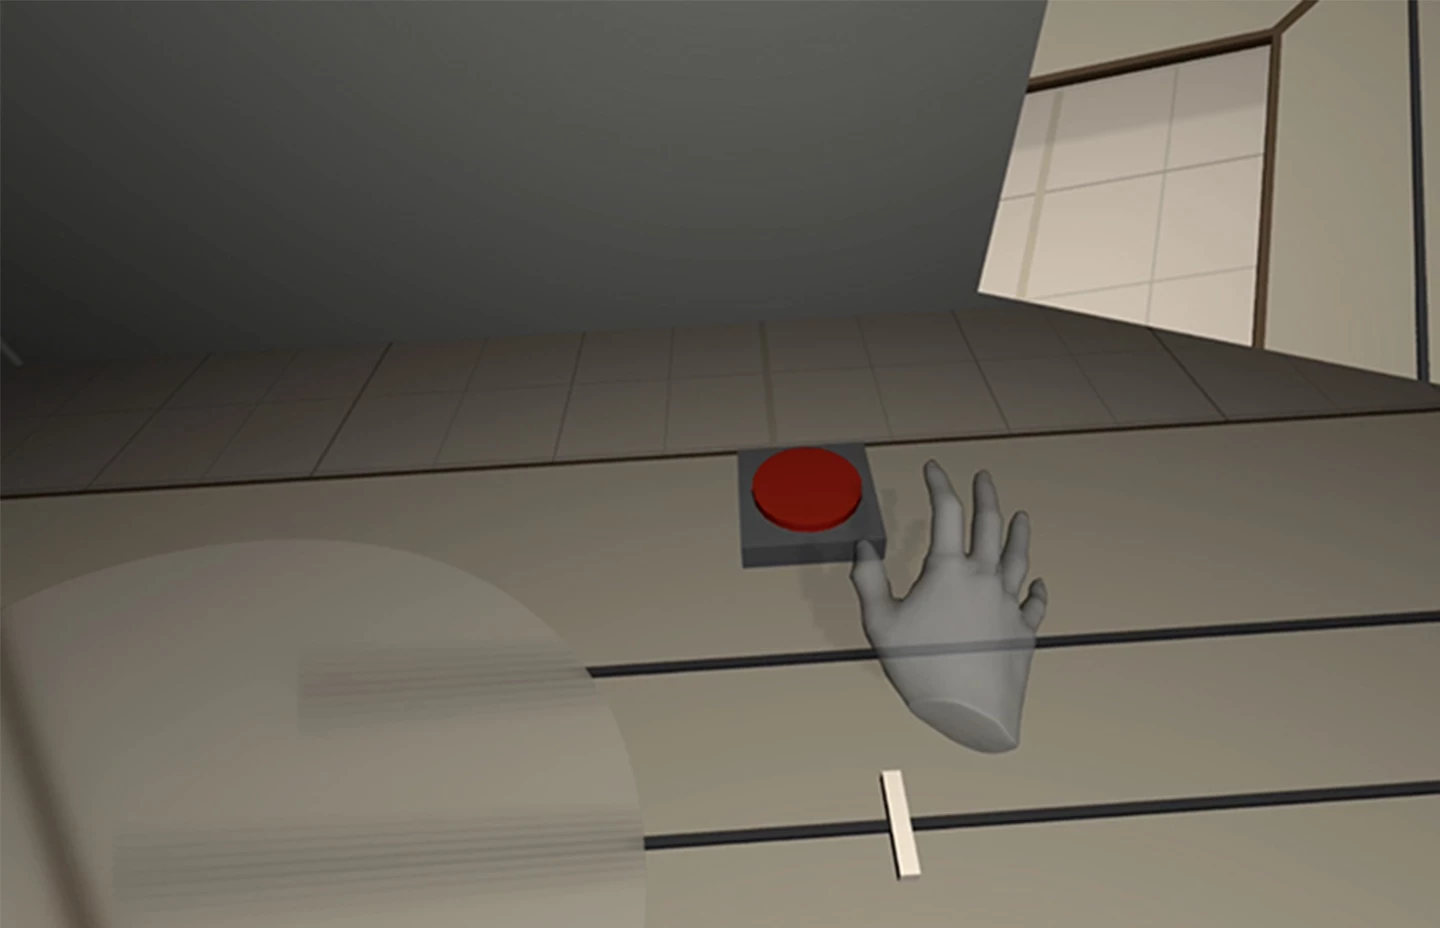 Virtual model of a hand reaching out to press a red button